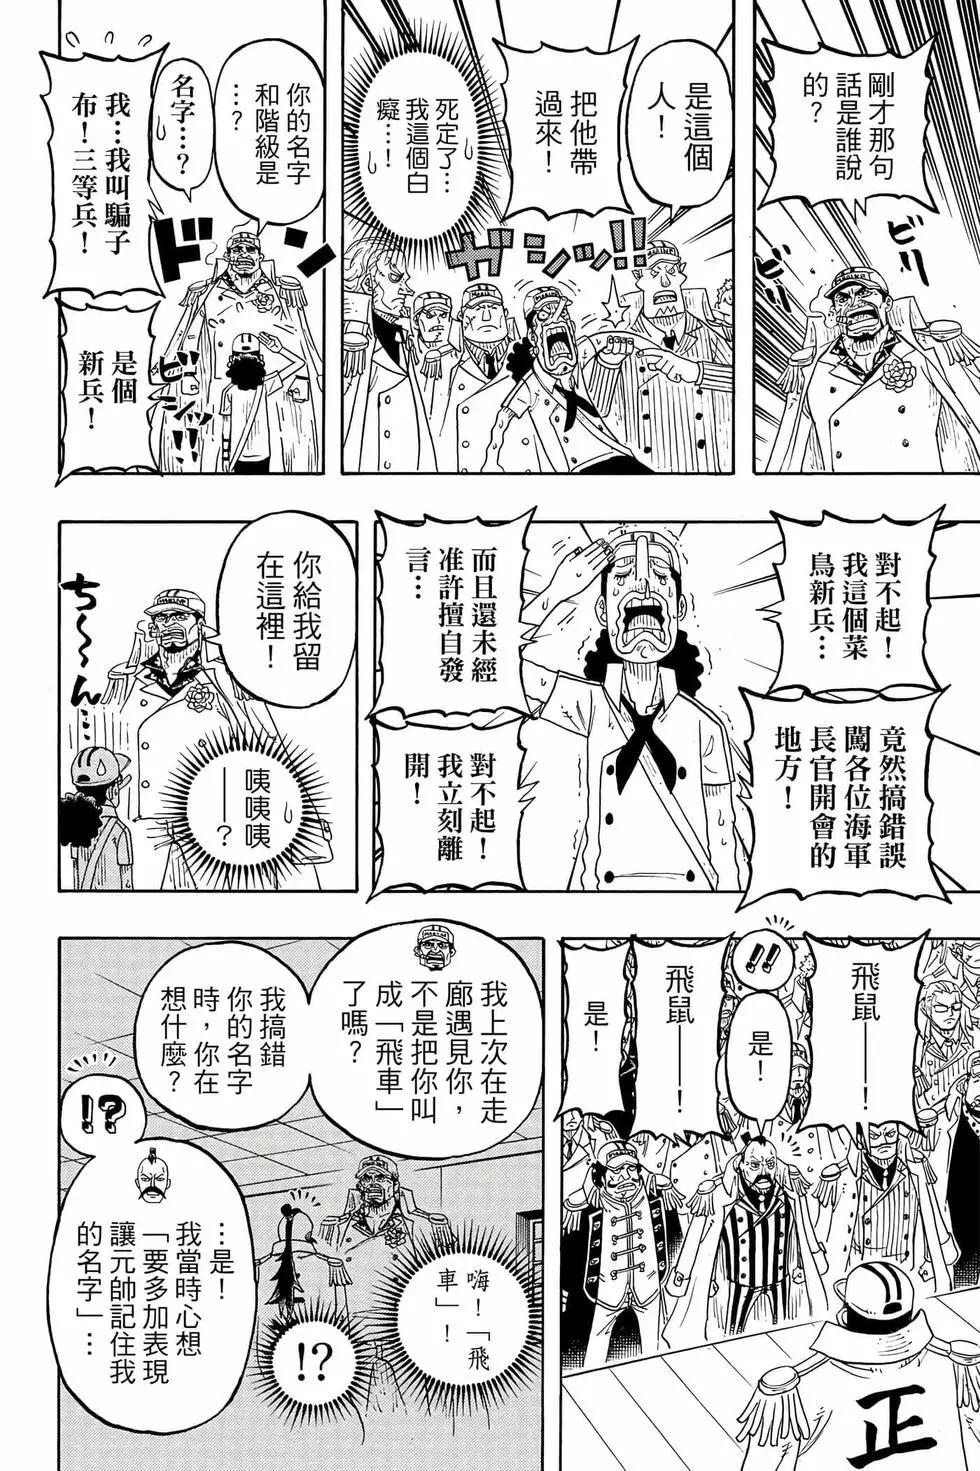 One piece party - 第04卷(1/4) - 3